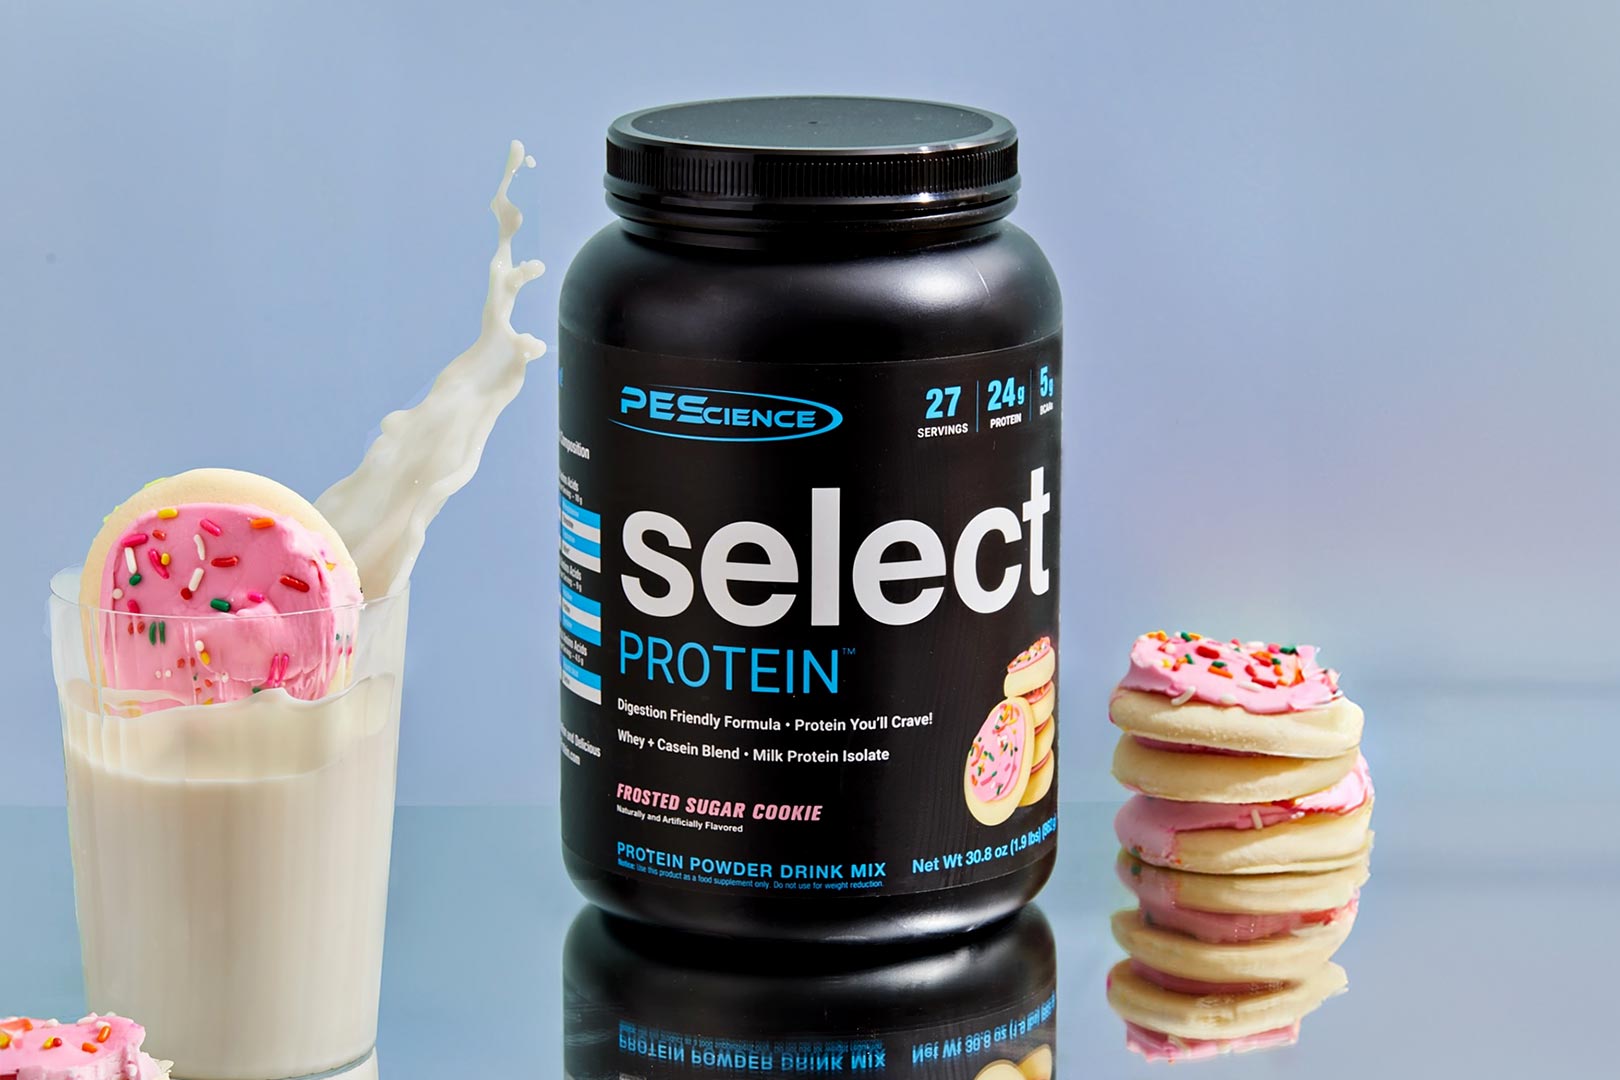 Pescience Frosted Sugar Cookie Select Protein